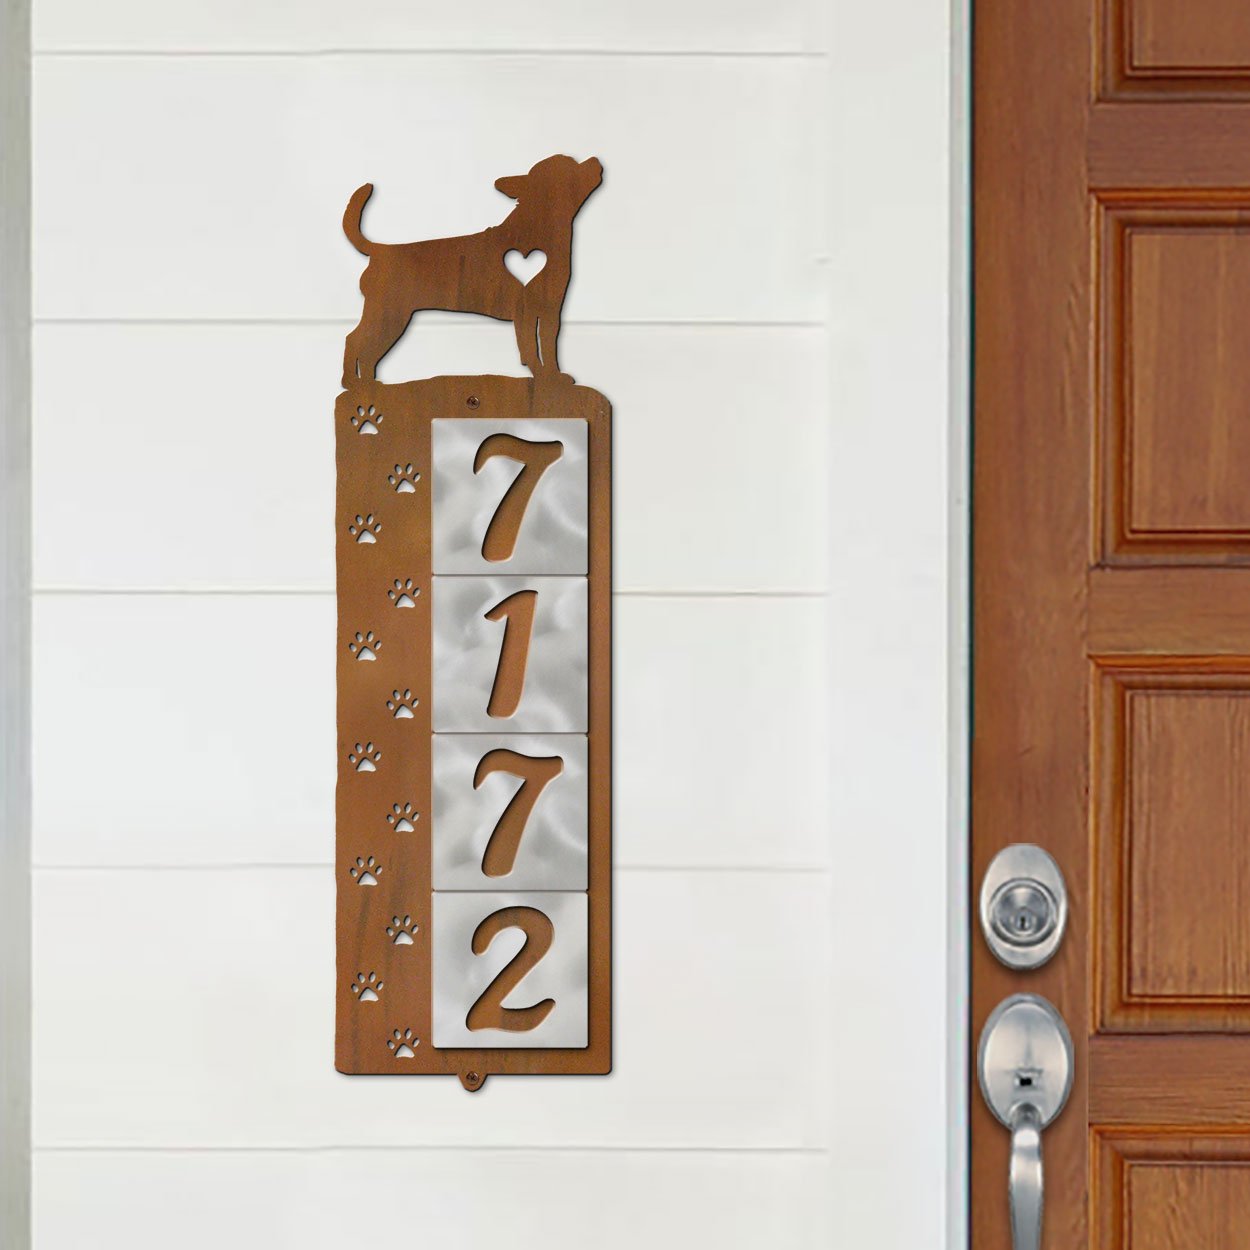 606174 - Chihuahua Nose Prints 4-Digit Vertical Tile House Numbers